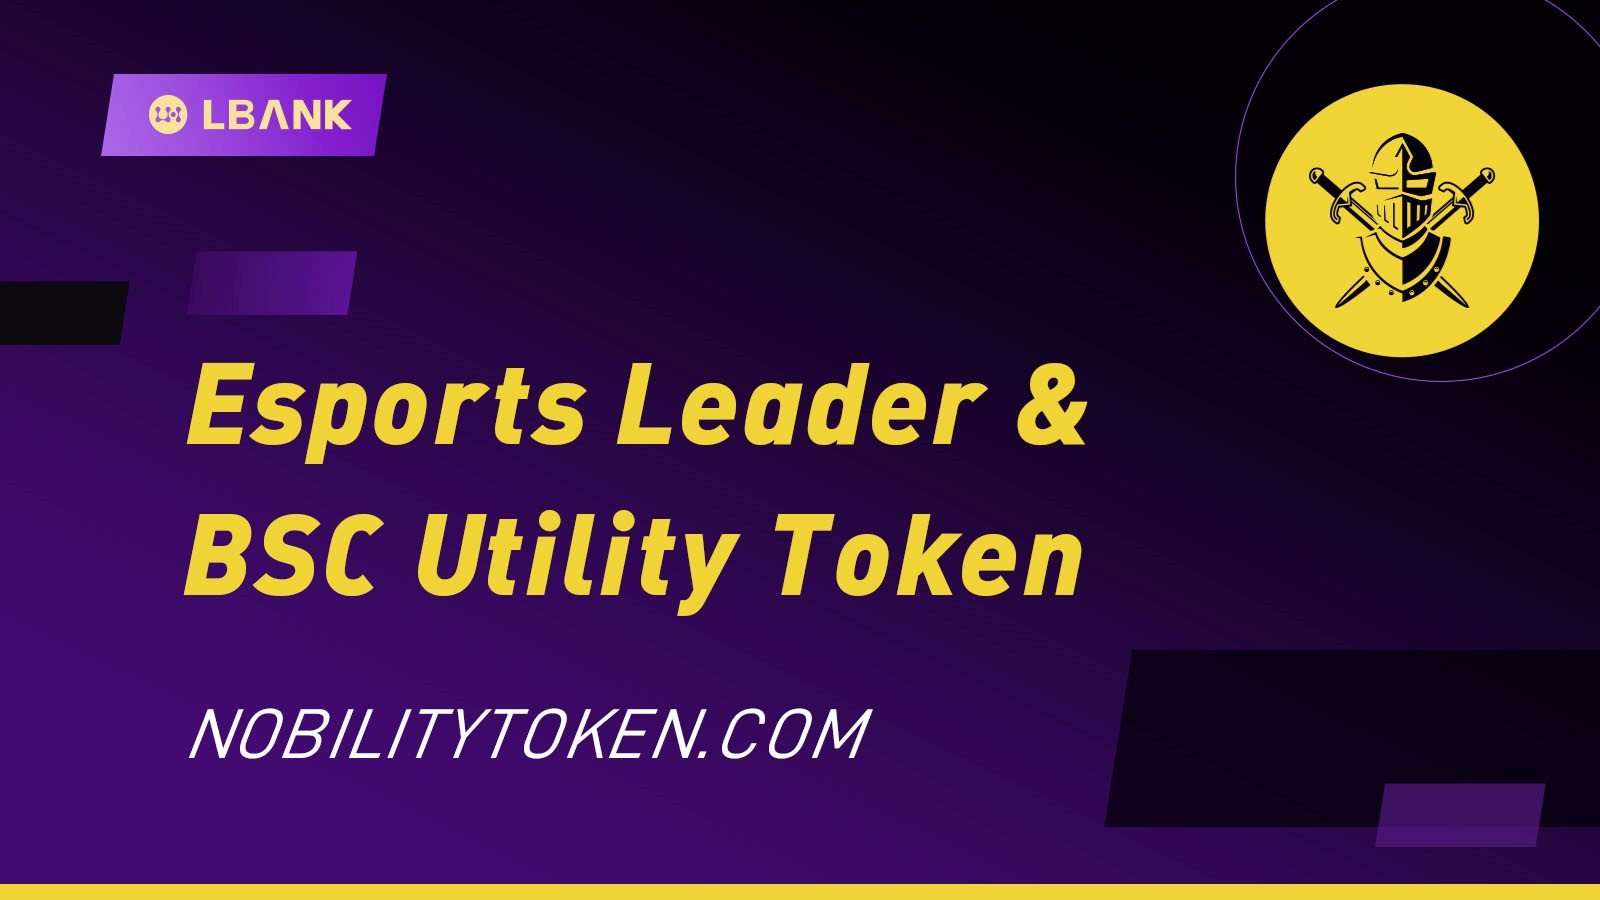 Nobility Is Integrating Crypto Into eSports, Would It Be a Match Made in Heaven?